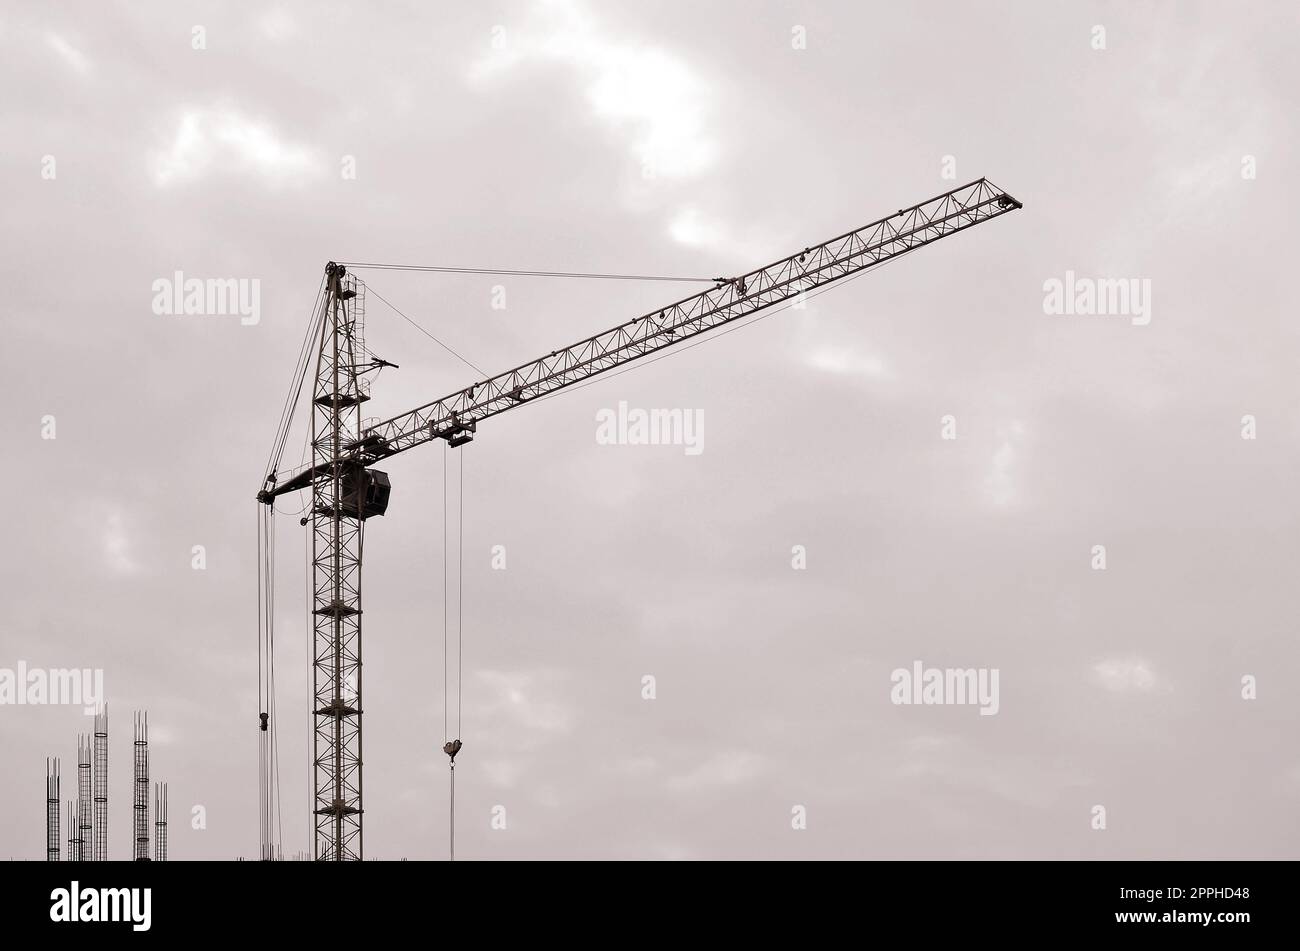 Abstract Industrial background with construction tower cranes over clear blue sky. Construction site. Building under construction concept. Retro tone Stock Photo